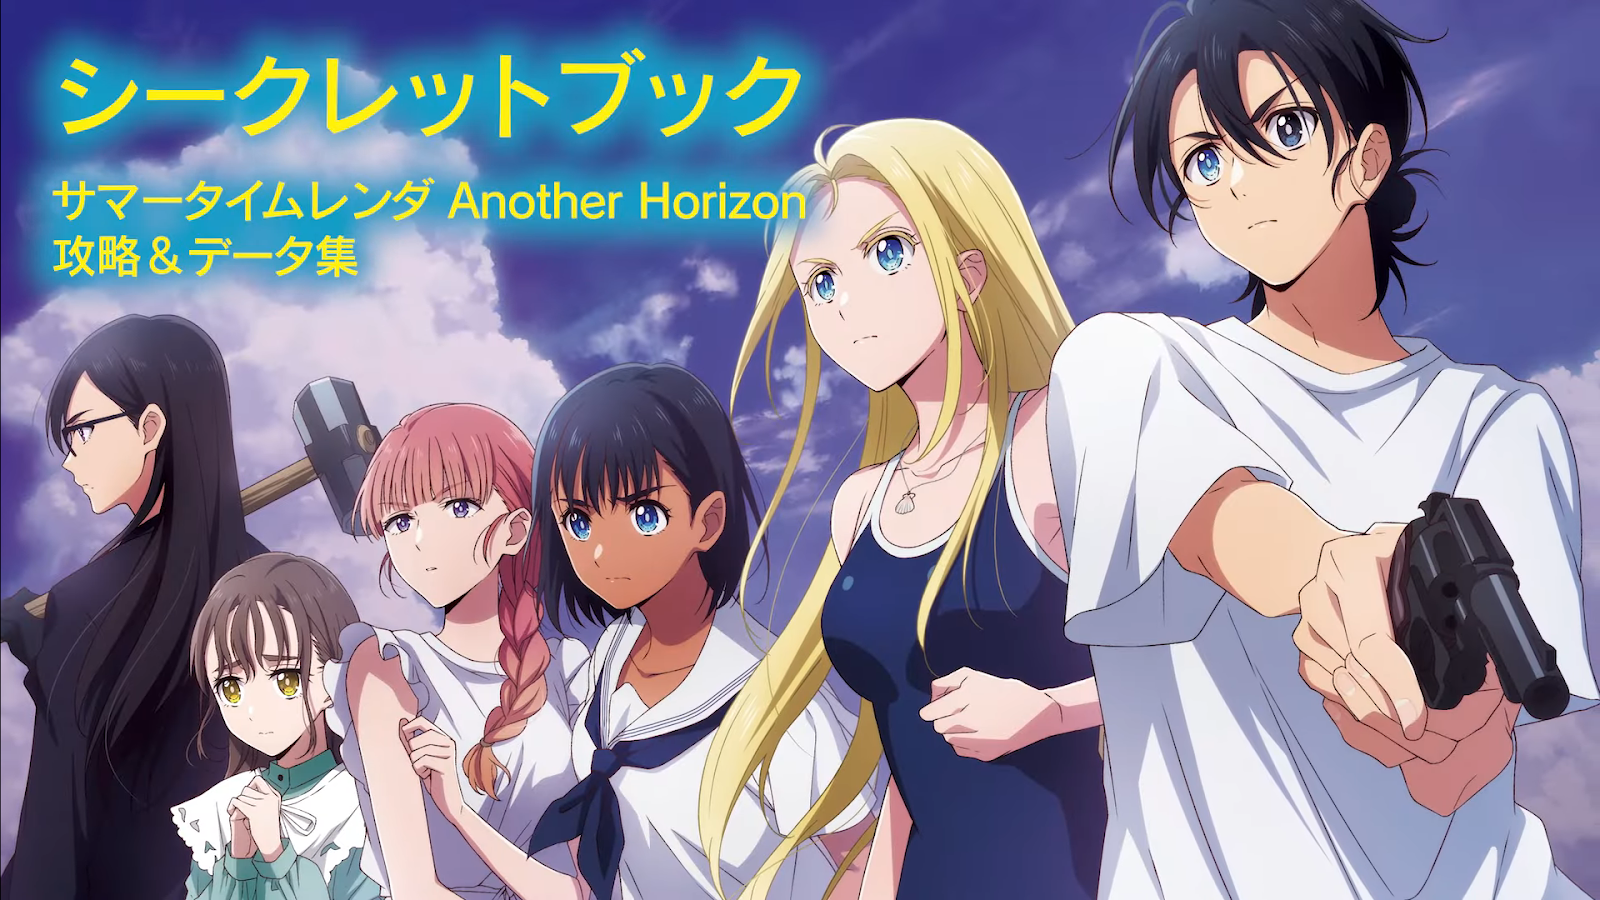 This is summertime rendering. A truly wonderful anime! #anime